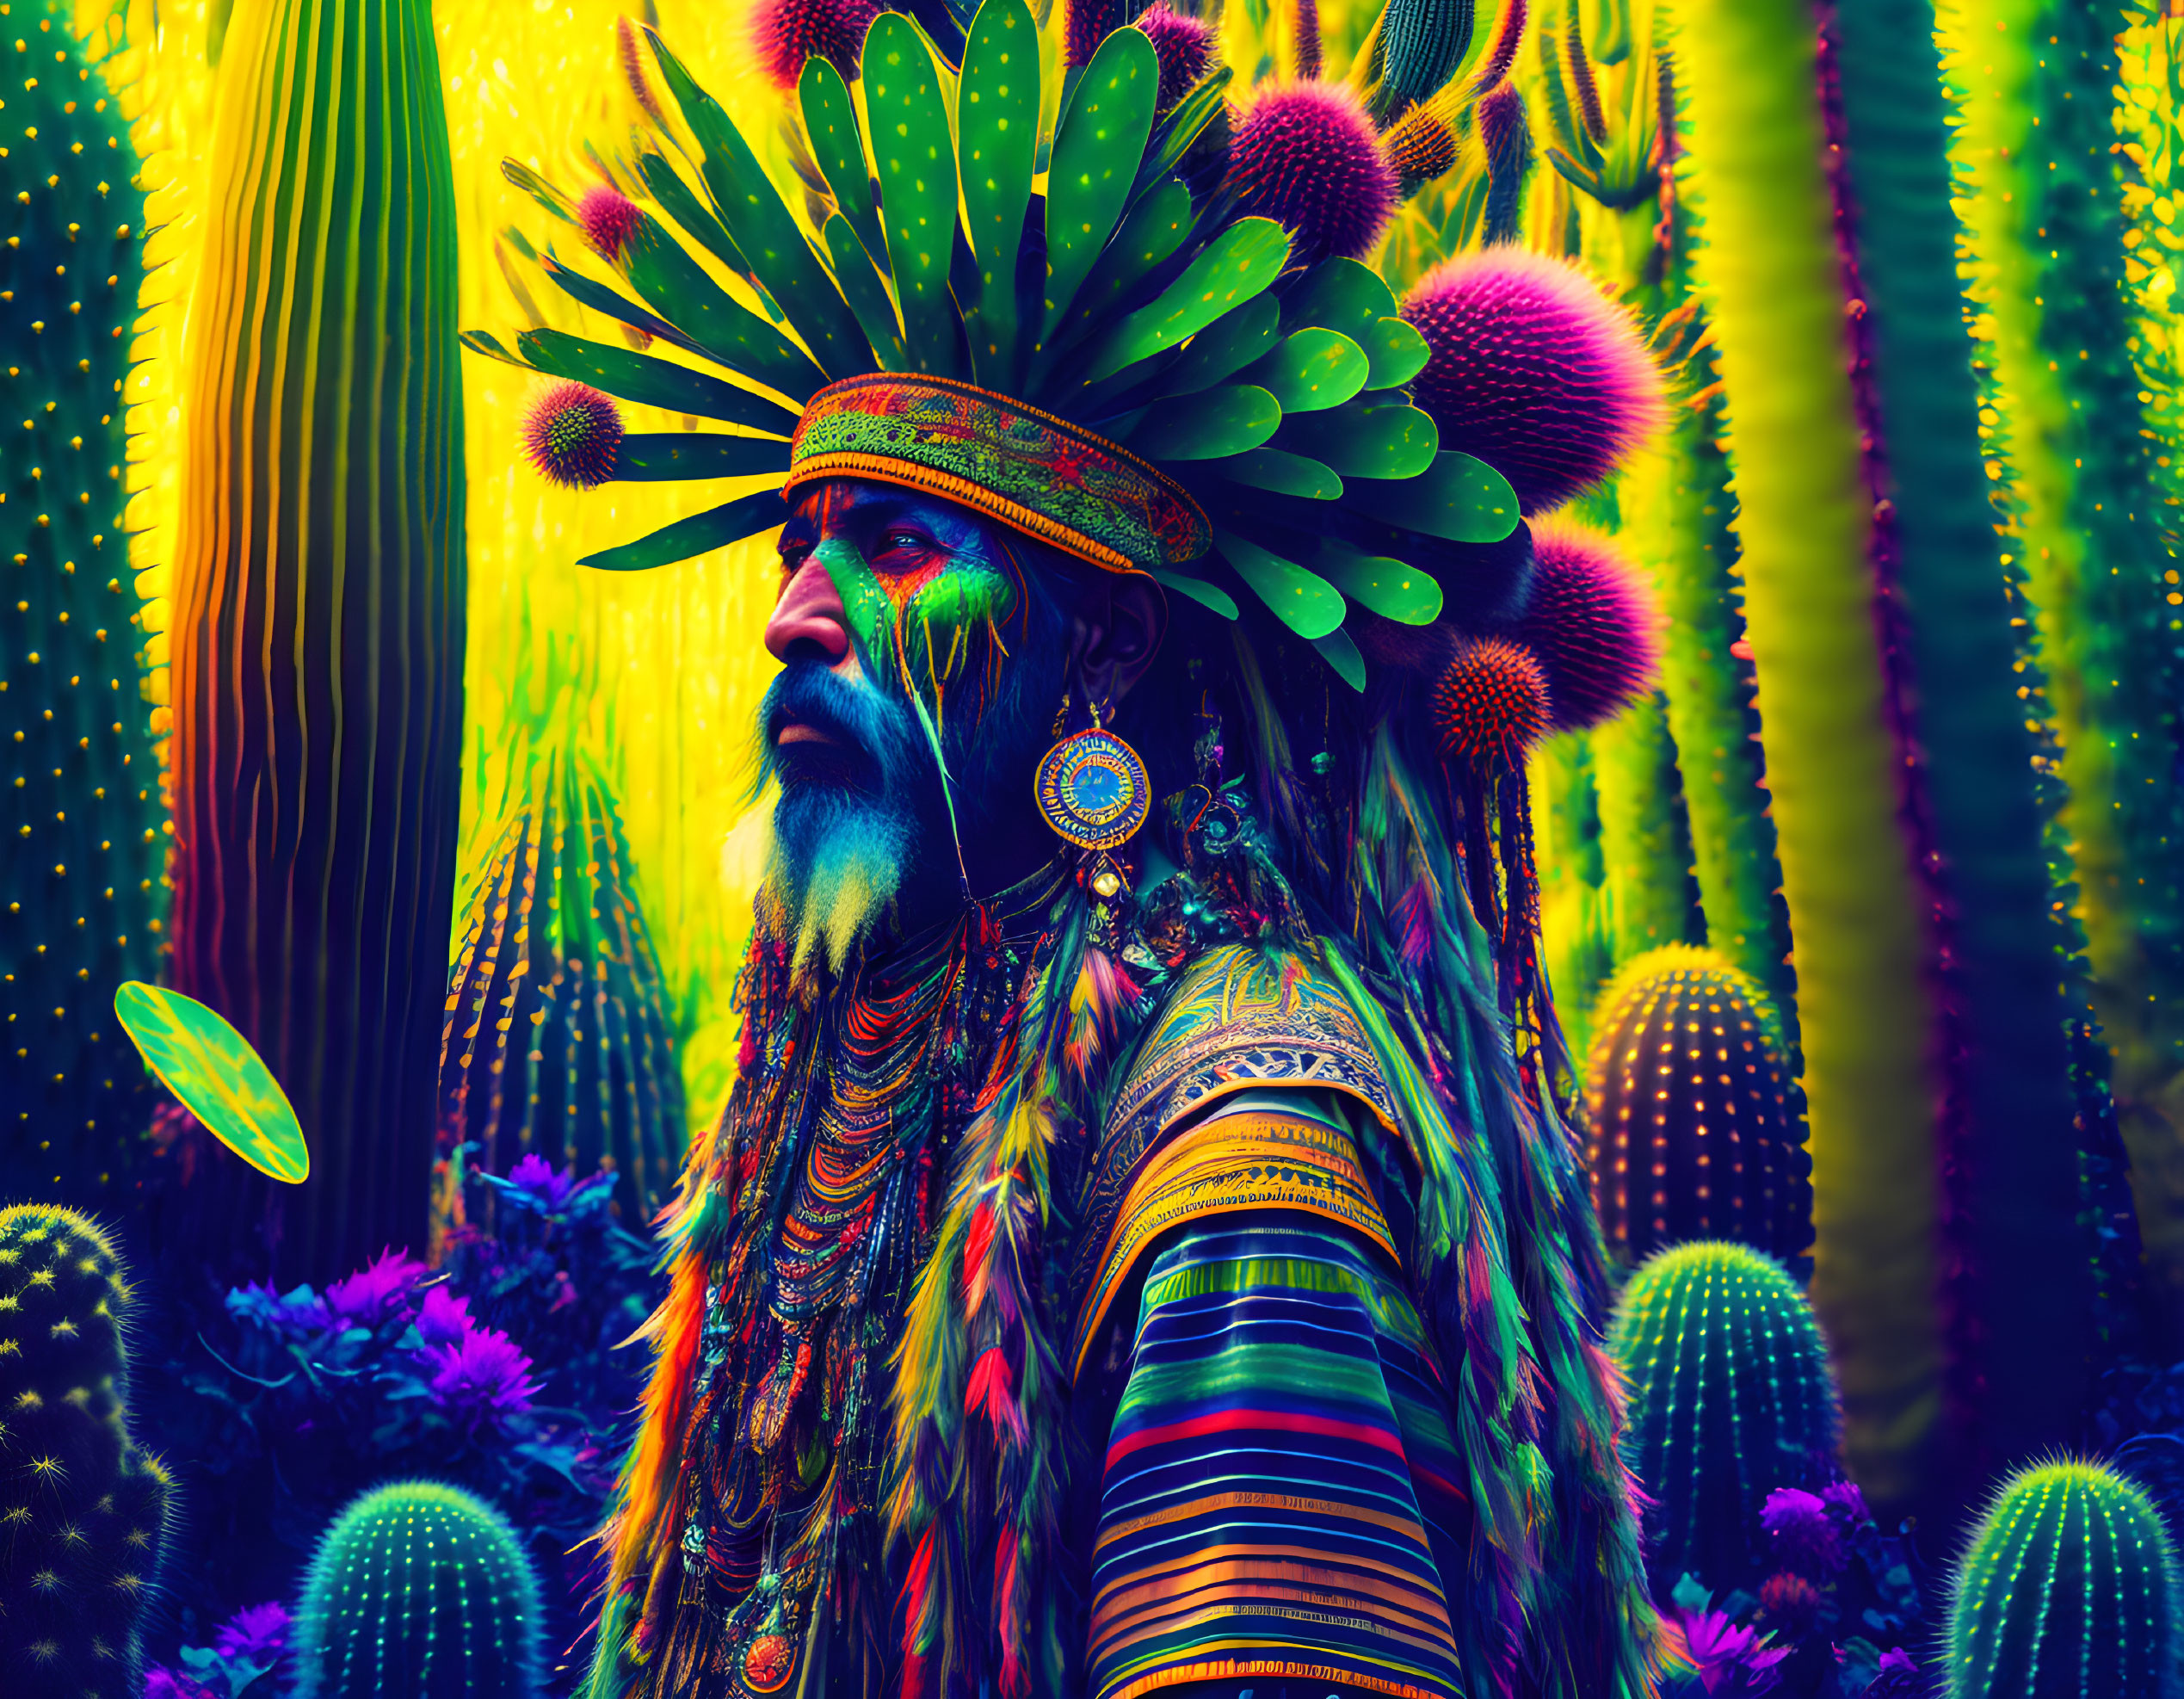 Colorful Image of Person in Aztec Attire with Psychedelic Cacti